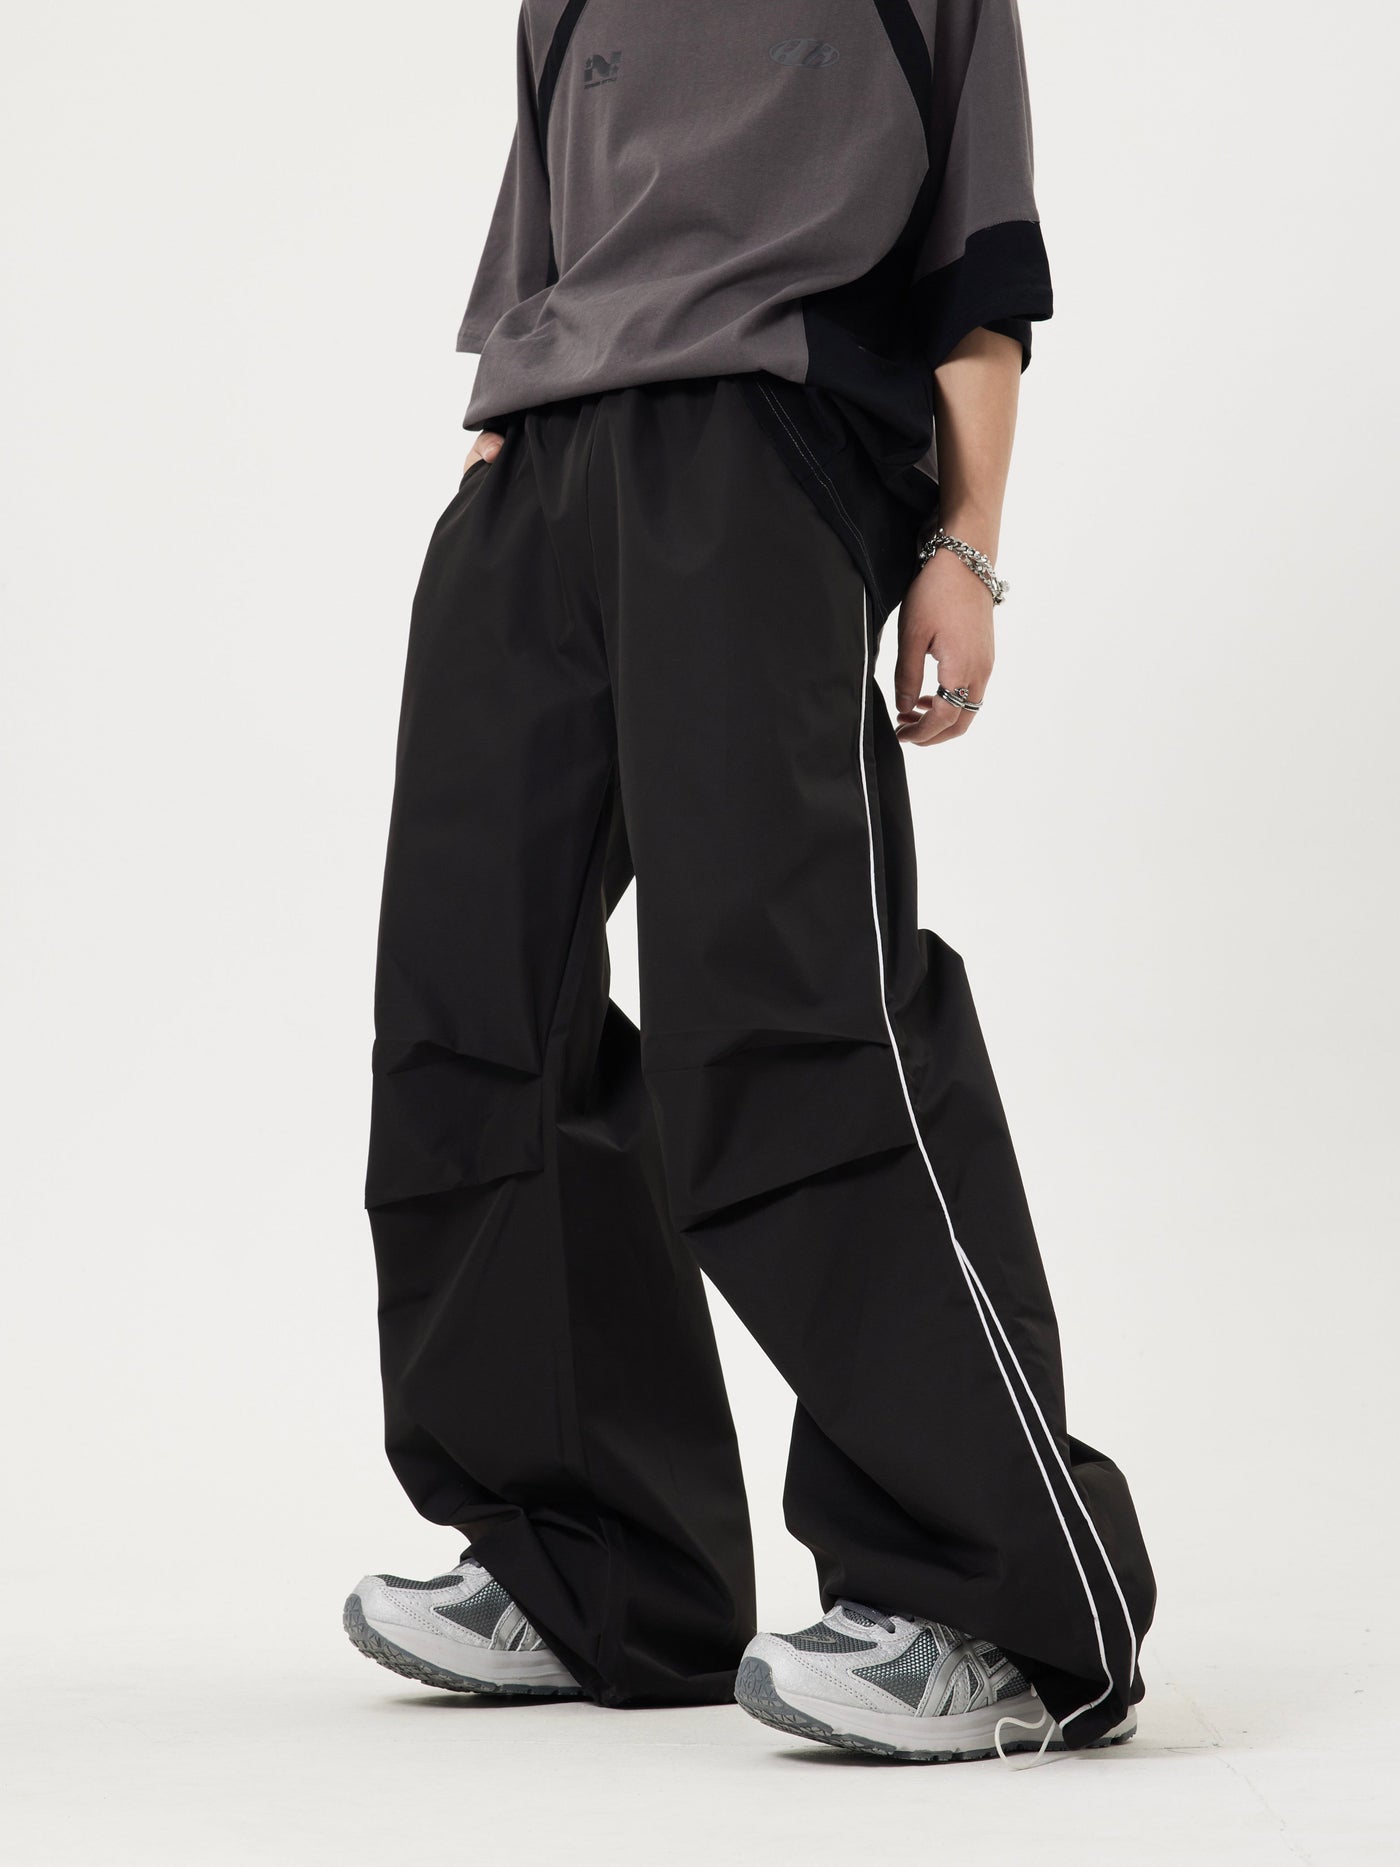 Piping Contrast Pleated Wide Cut Pants Korean Street Fashion Pants By Dark Fog Shop Online at OH Vault